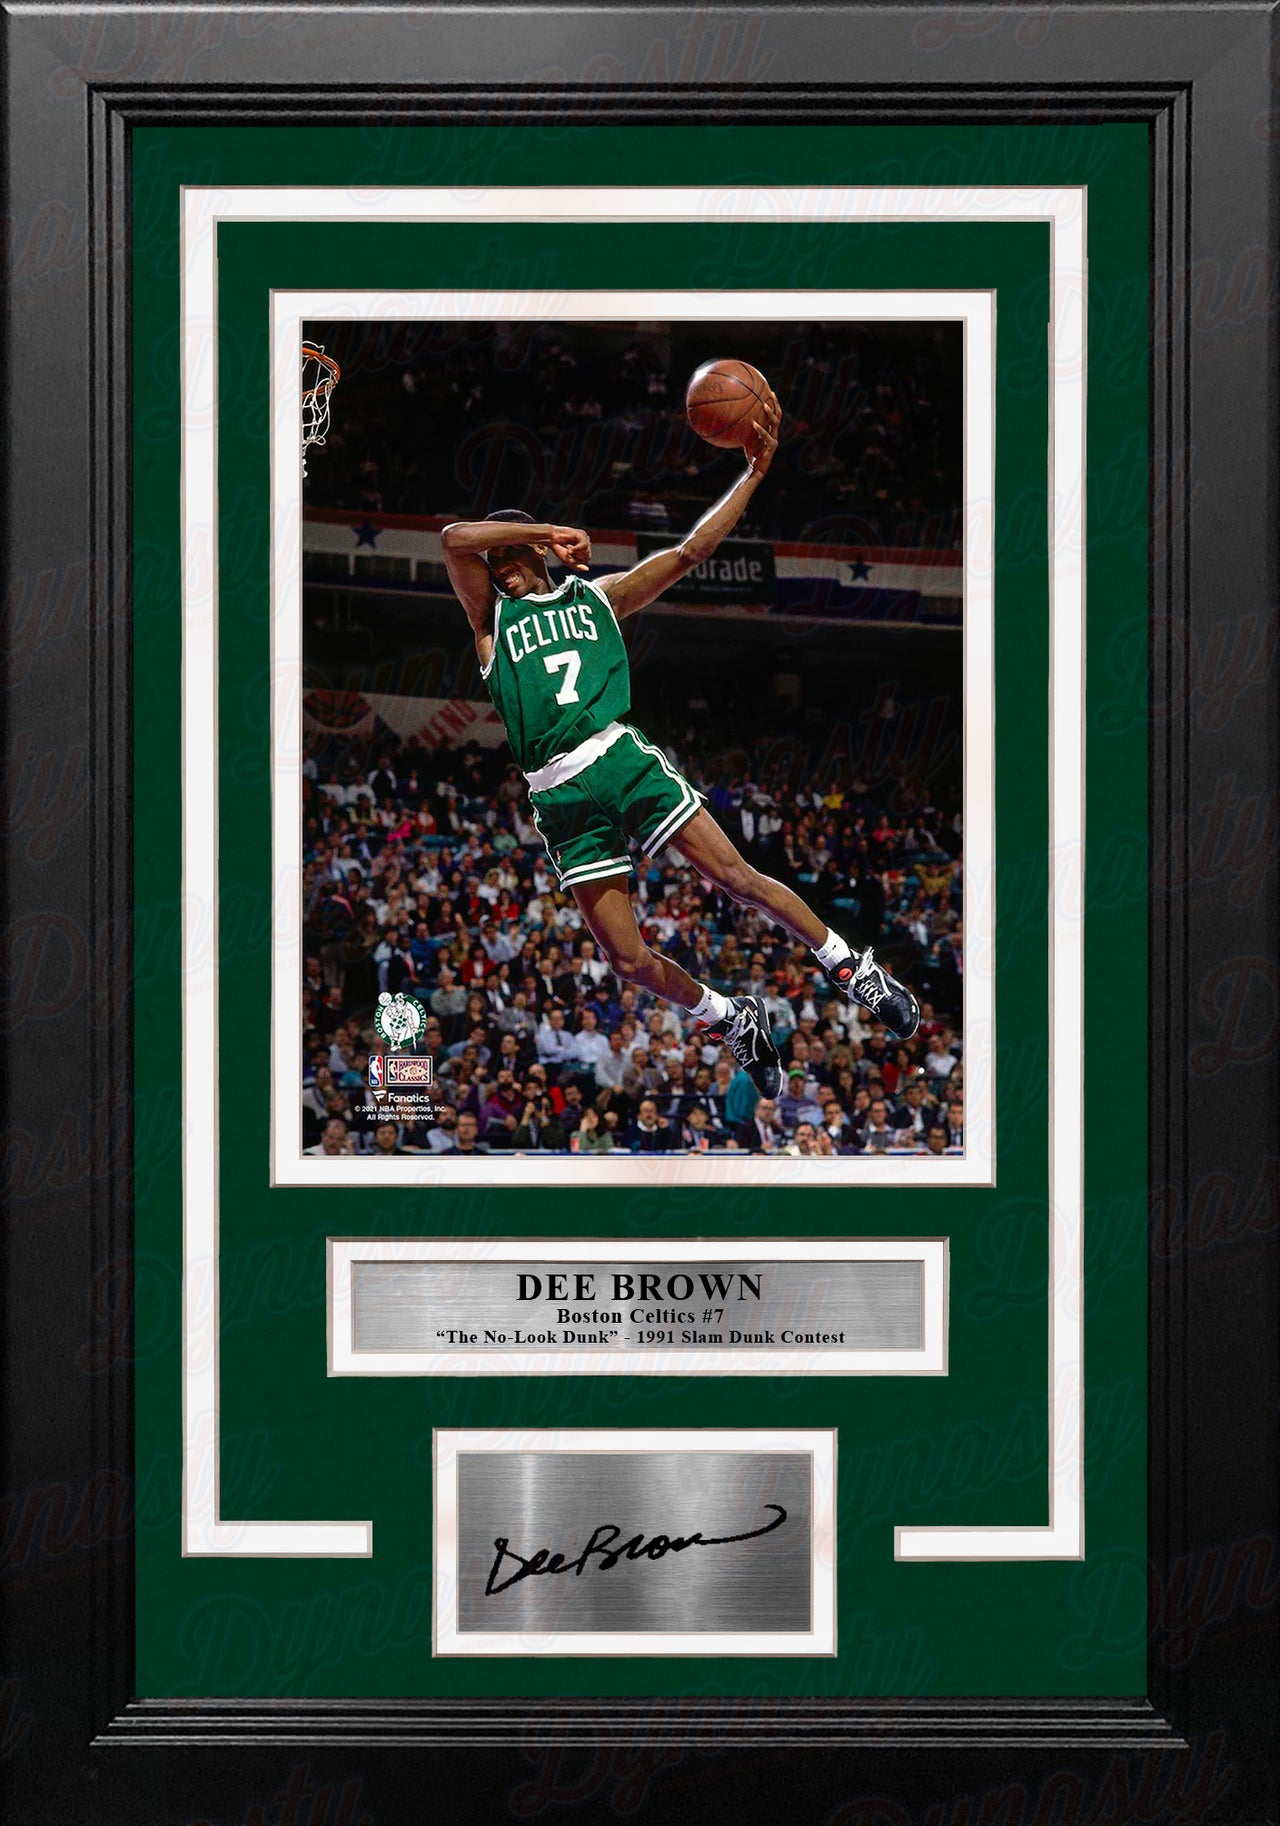 Dee Brown No-Look Dunk Slam Dunk Contest Boston Celtics 8x10 Framed Photo with Engraved Autograph - Dynasty Sports & Framing 